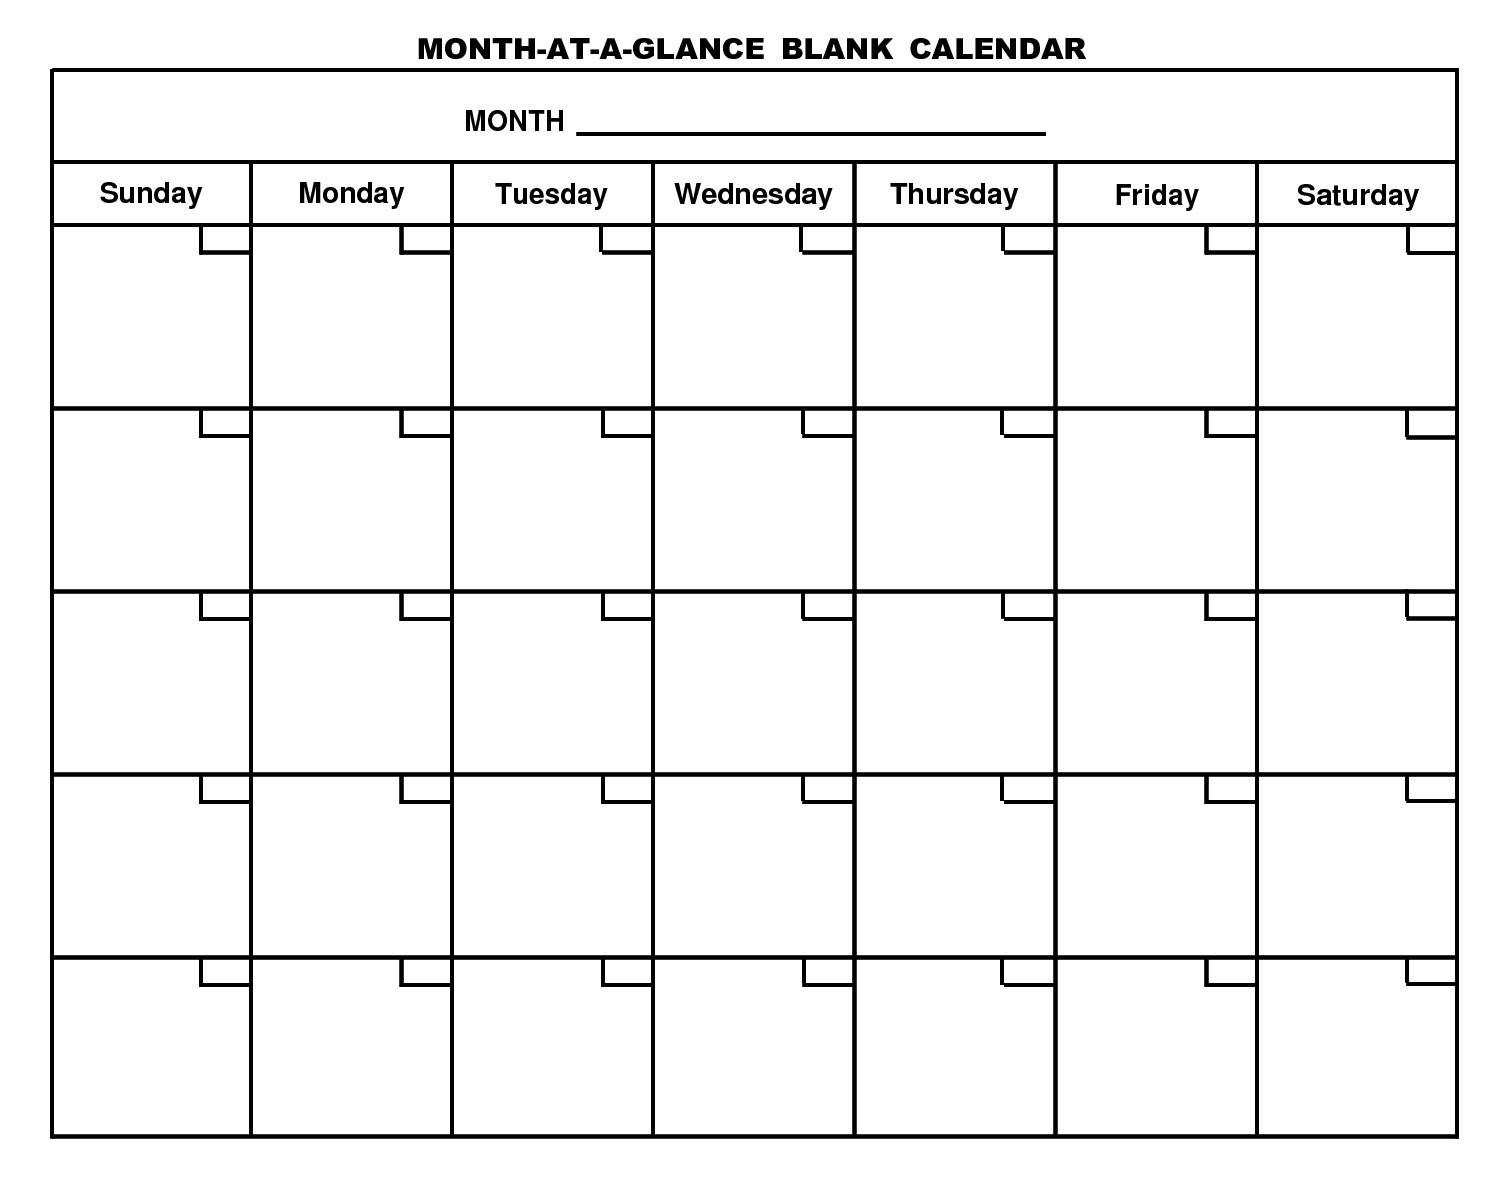 Month At A Glance Blank Calendar Template – Dalep.midnightpig.co With Regard To Month At A Glance Blank Calendar Template